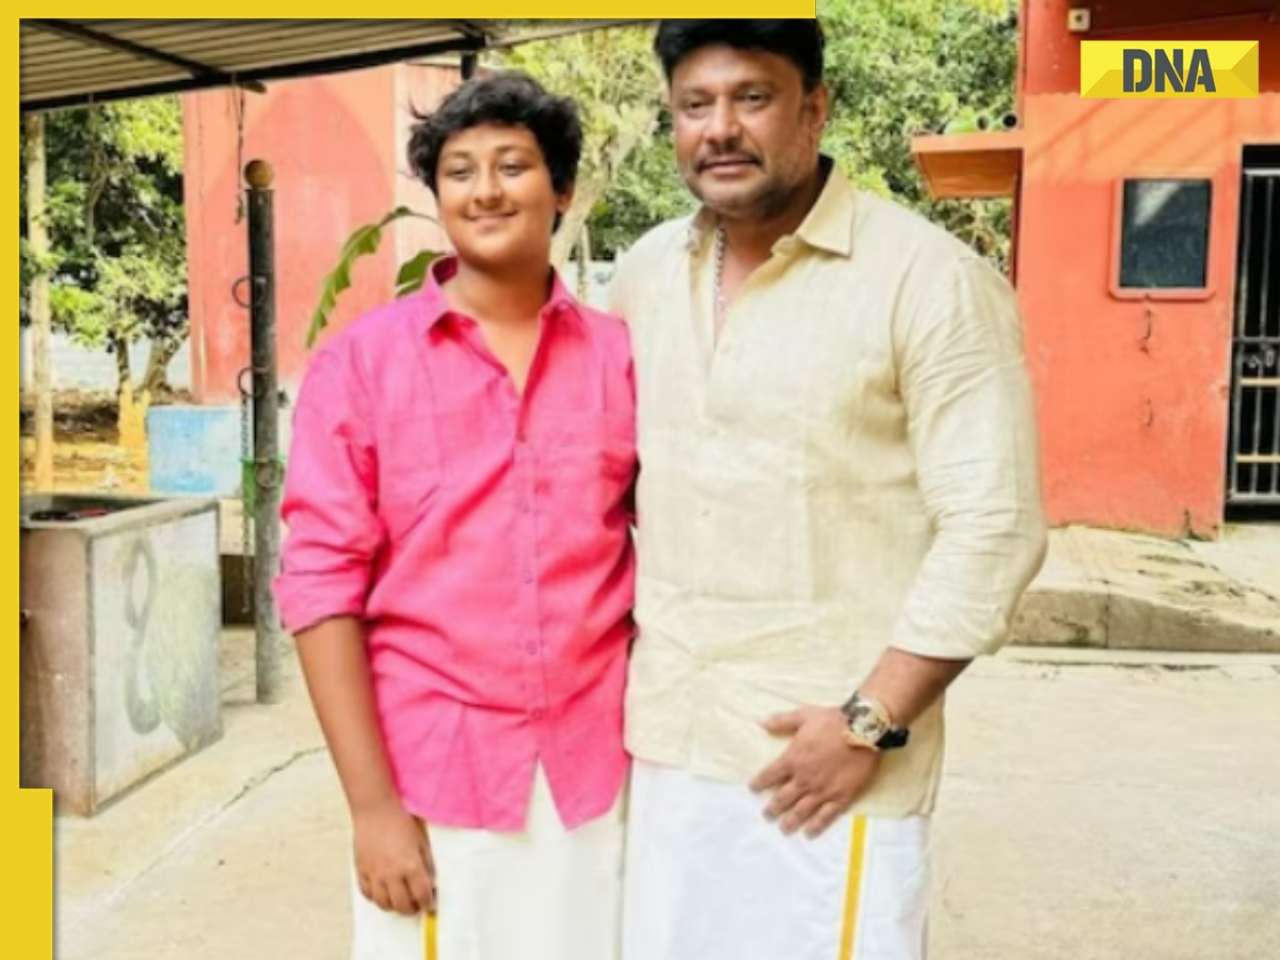 Darshan's 15-year-old son Vinish Darshan slams trolls after father's arrest: 'Cursing at me...'